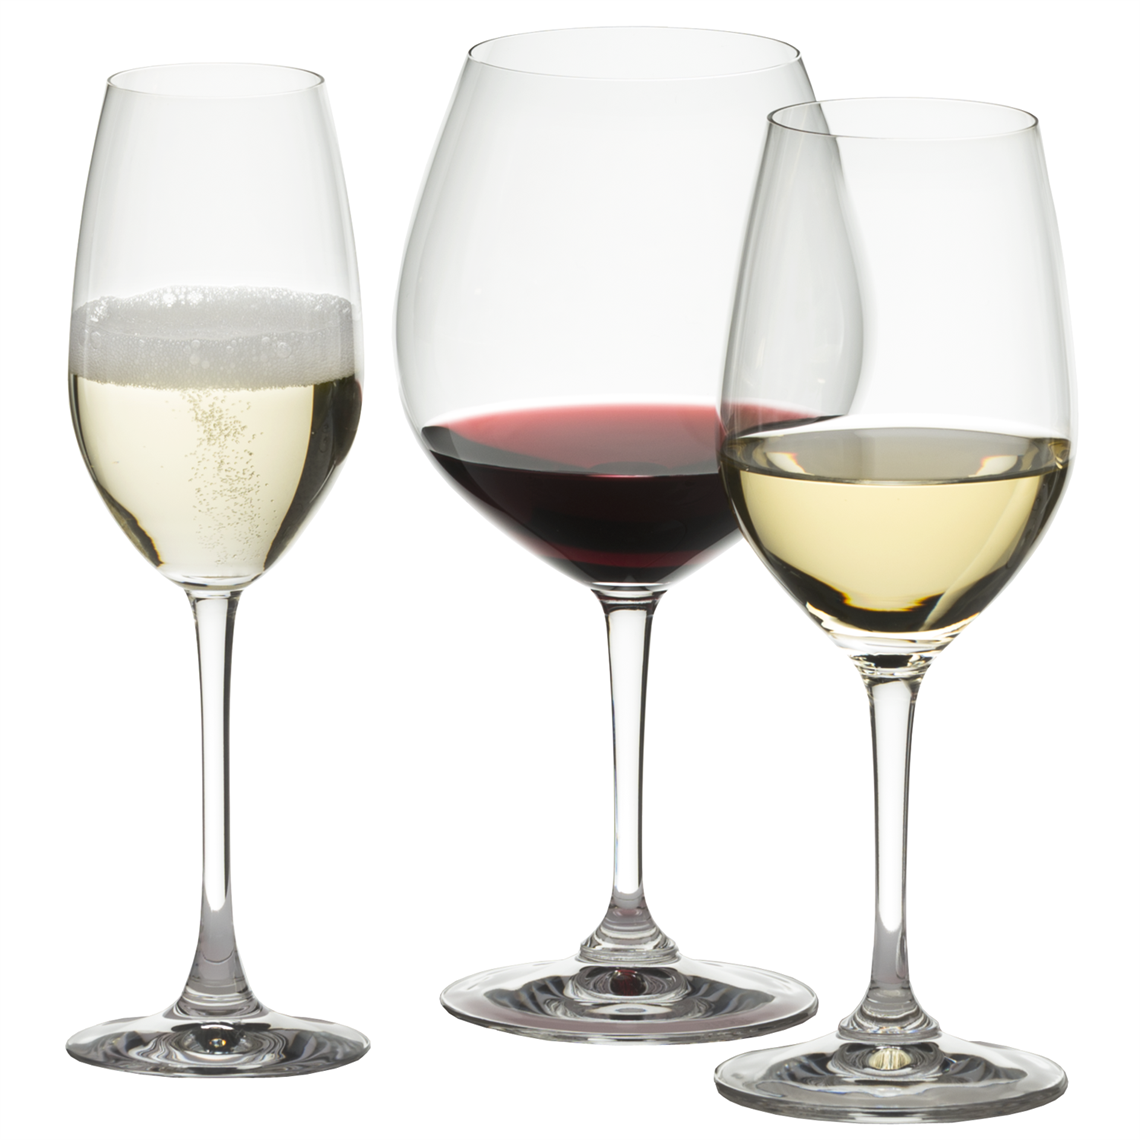 View more grassl glass from our Restaurant & Trade Glasses range